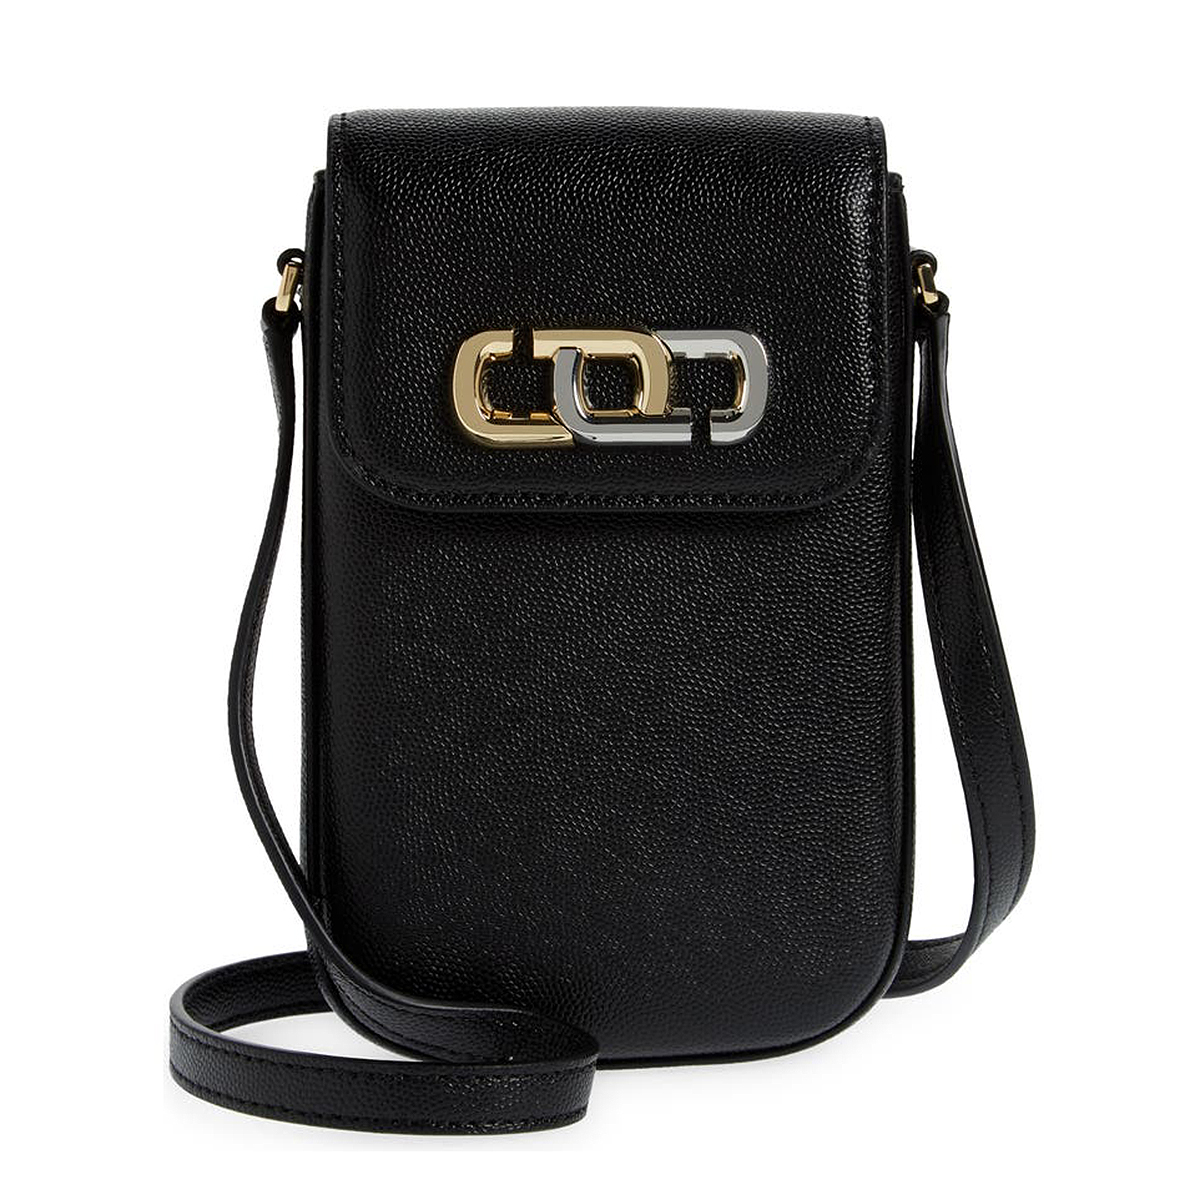 18 Best Chic Crossbody Bags — From $16 to $289